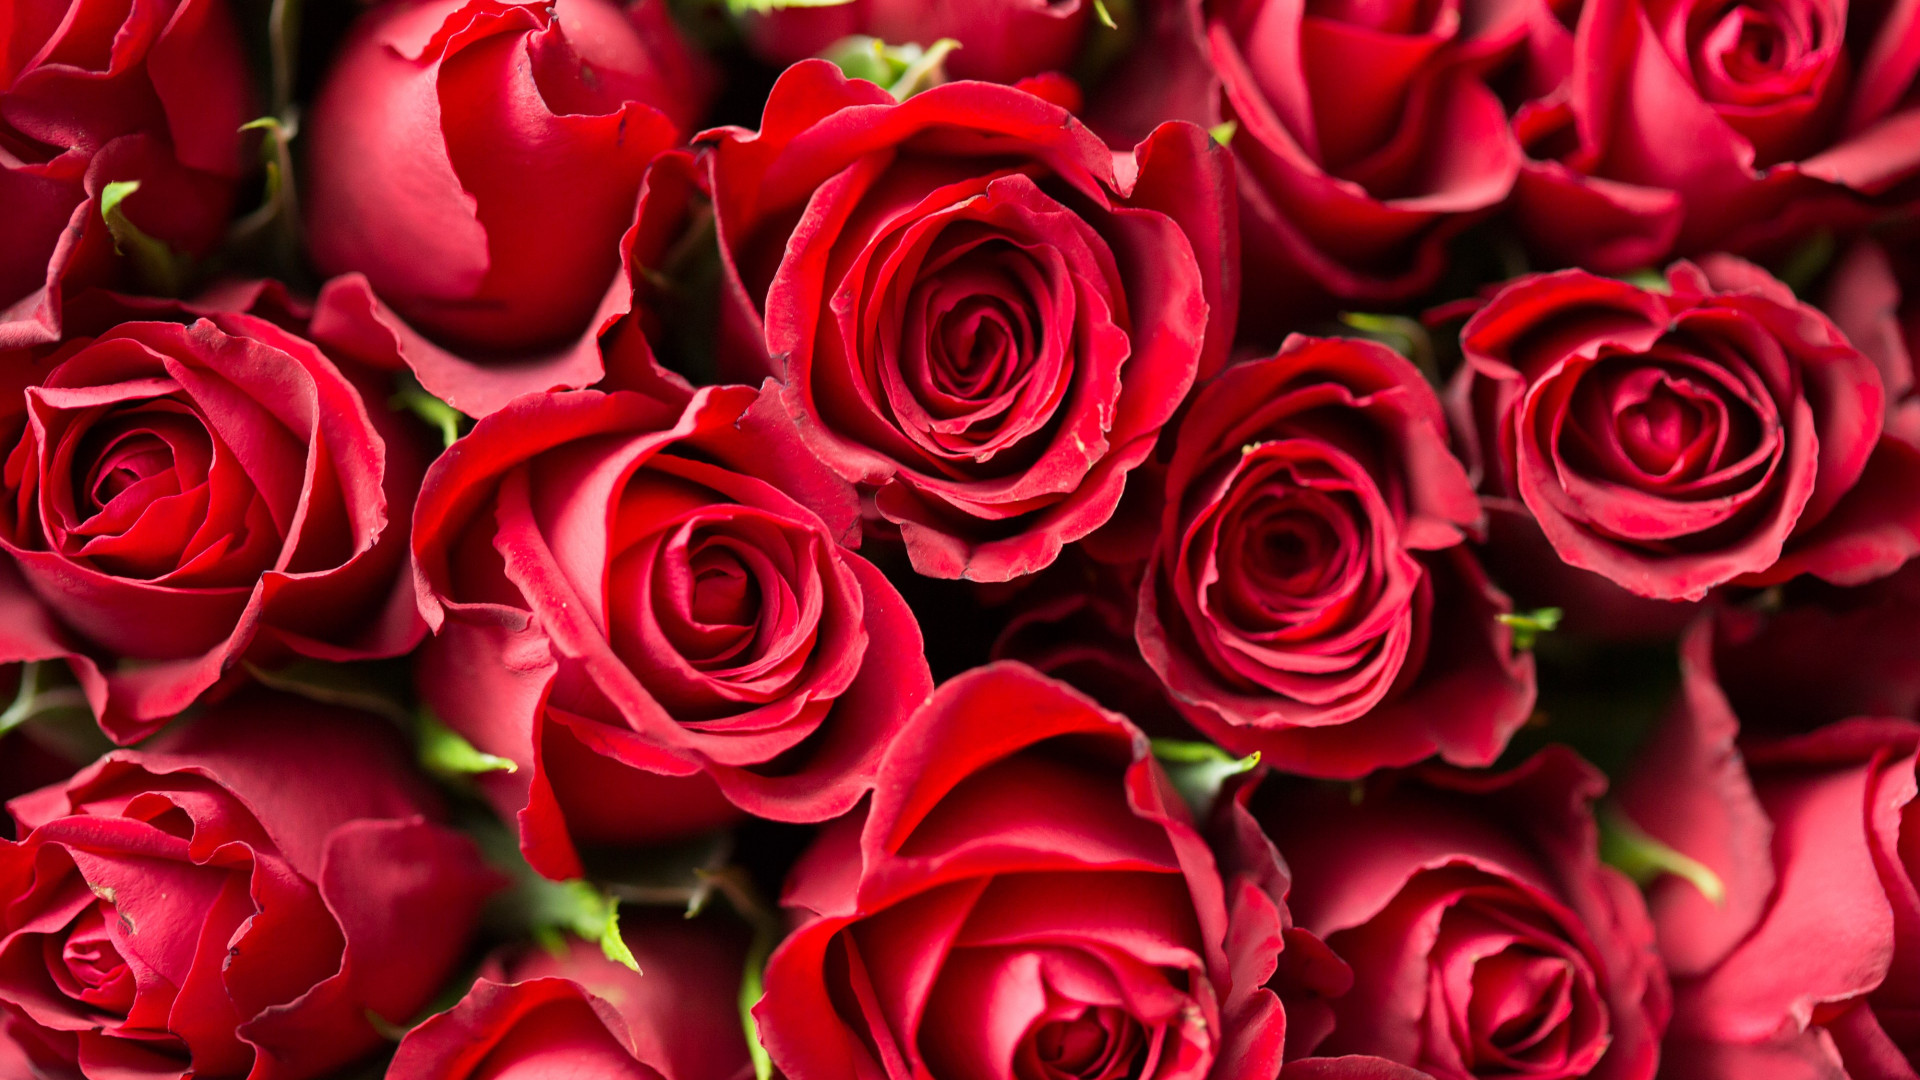 Lots of red roses wallpaper 1920x1080